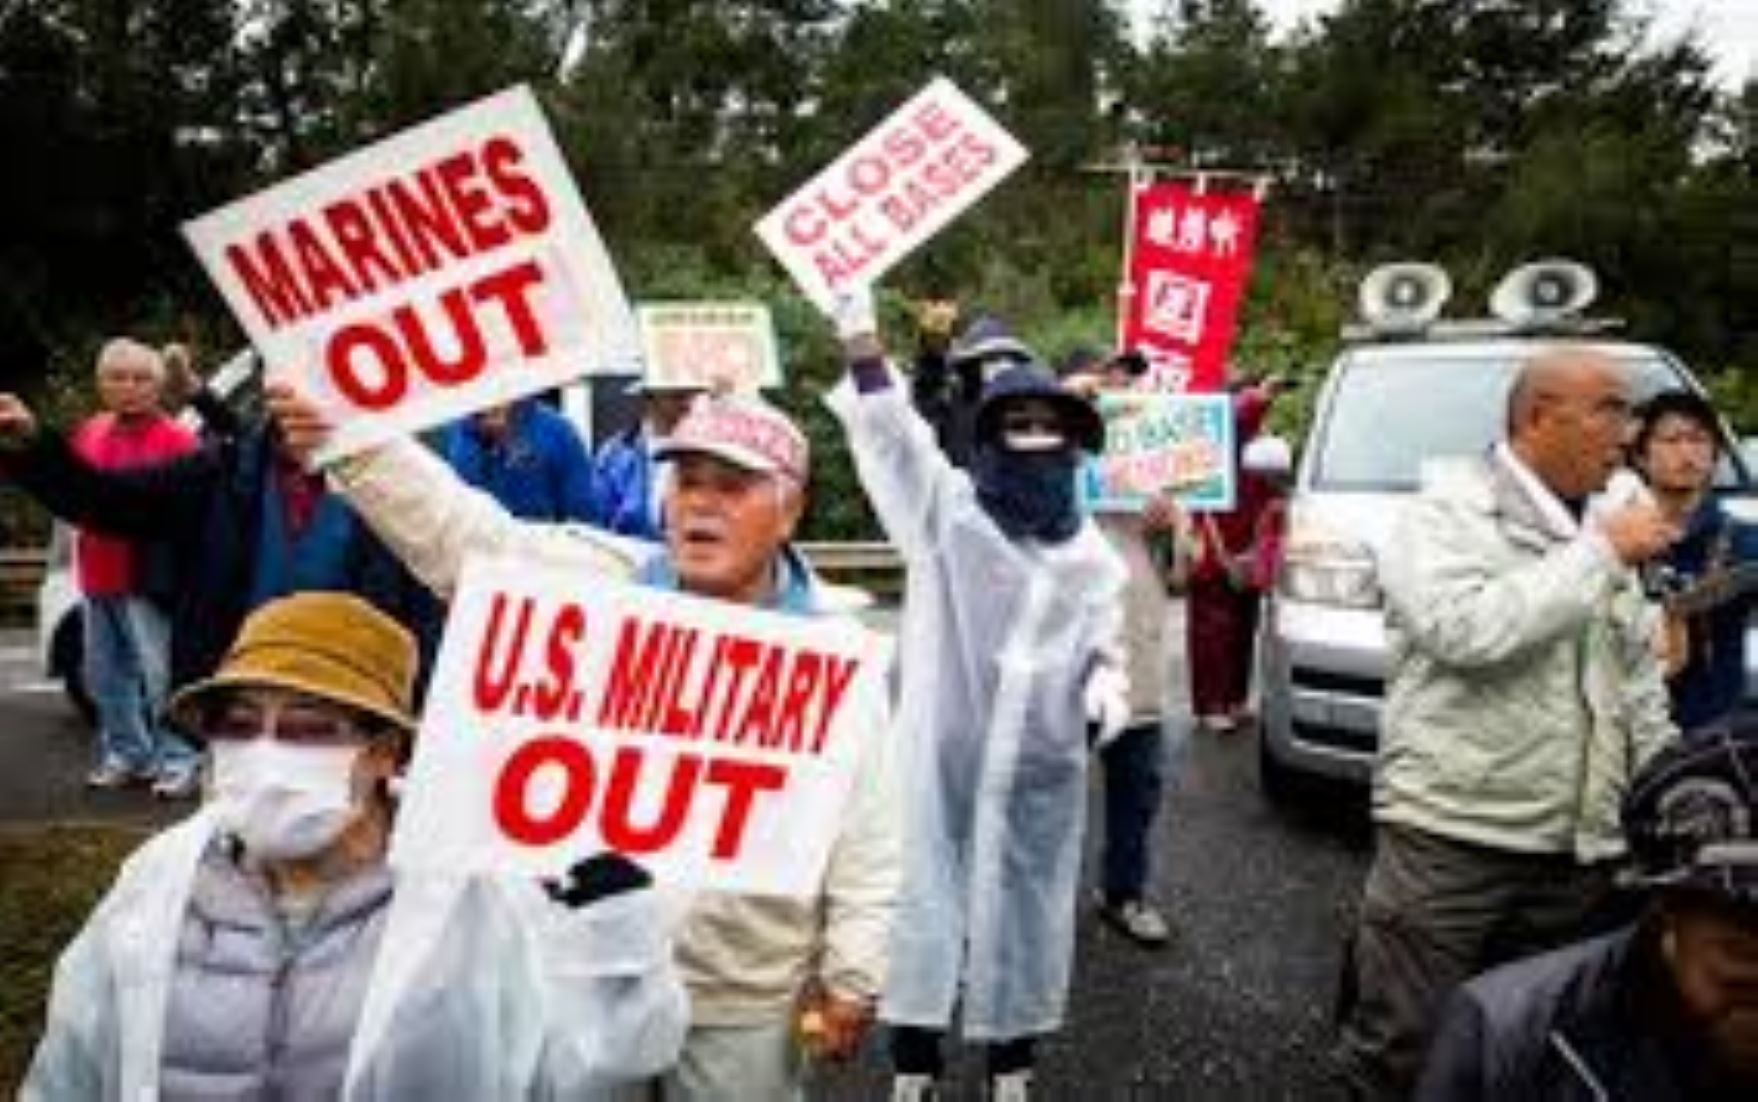 Okinawa Gov’t, Civic Groups Protest Alleged Sexual Assault Of Minor By U.S. Airman